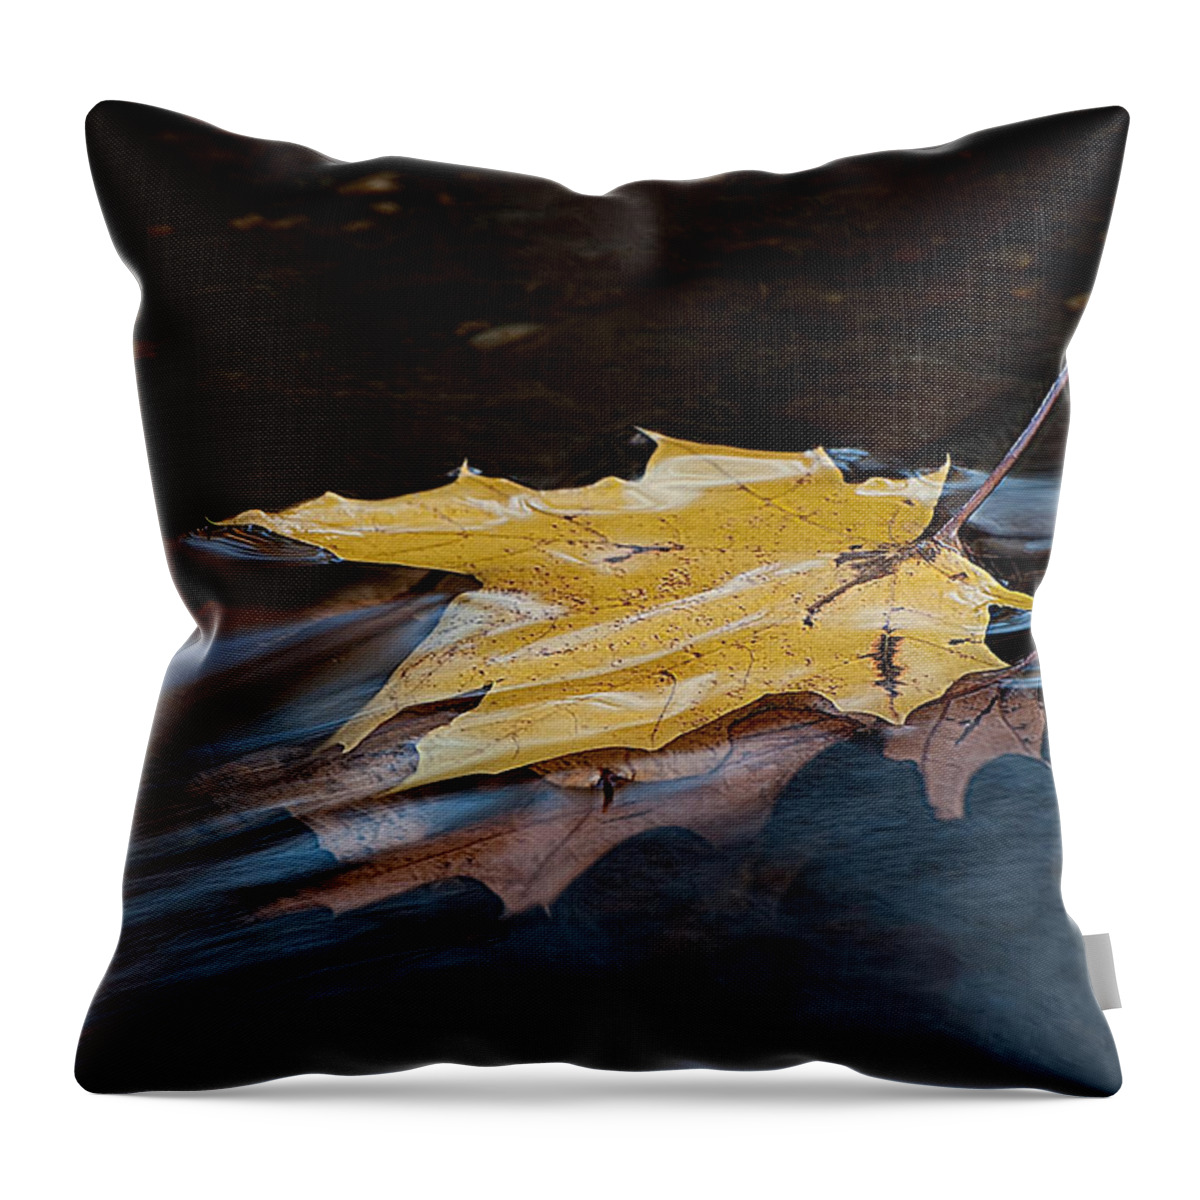 Autumn Throw Pillow featuring the photograph Stacked Autumn Leaves On Water by Gary Slawsky